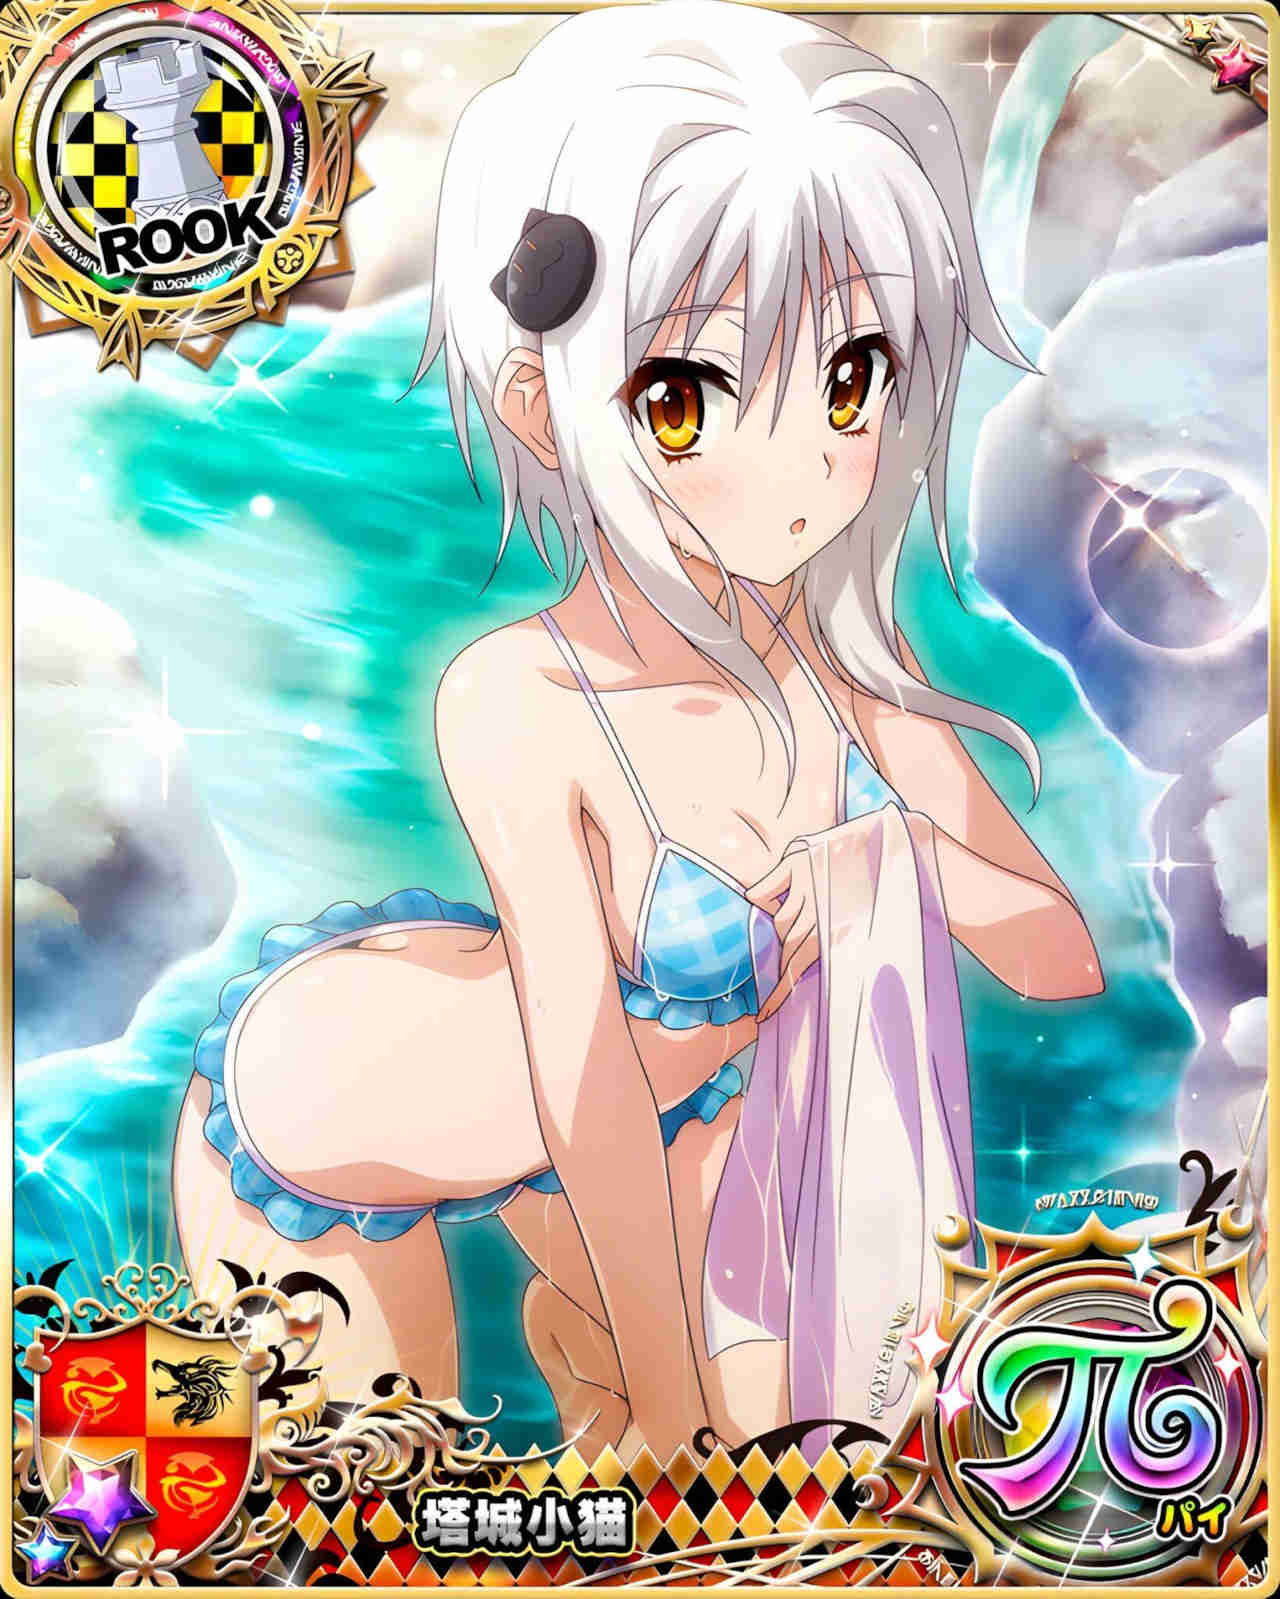 To take the chill off: The girls of High School DxD are now going to the hot springs